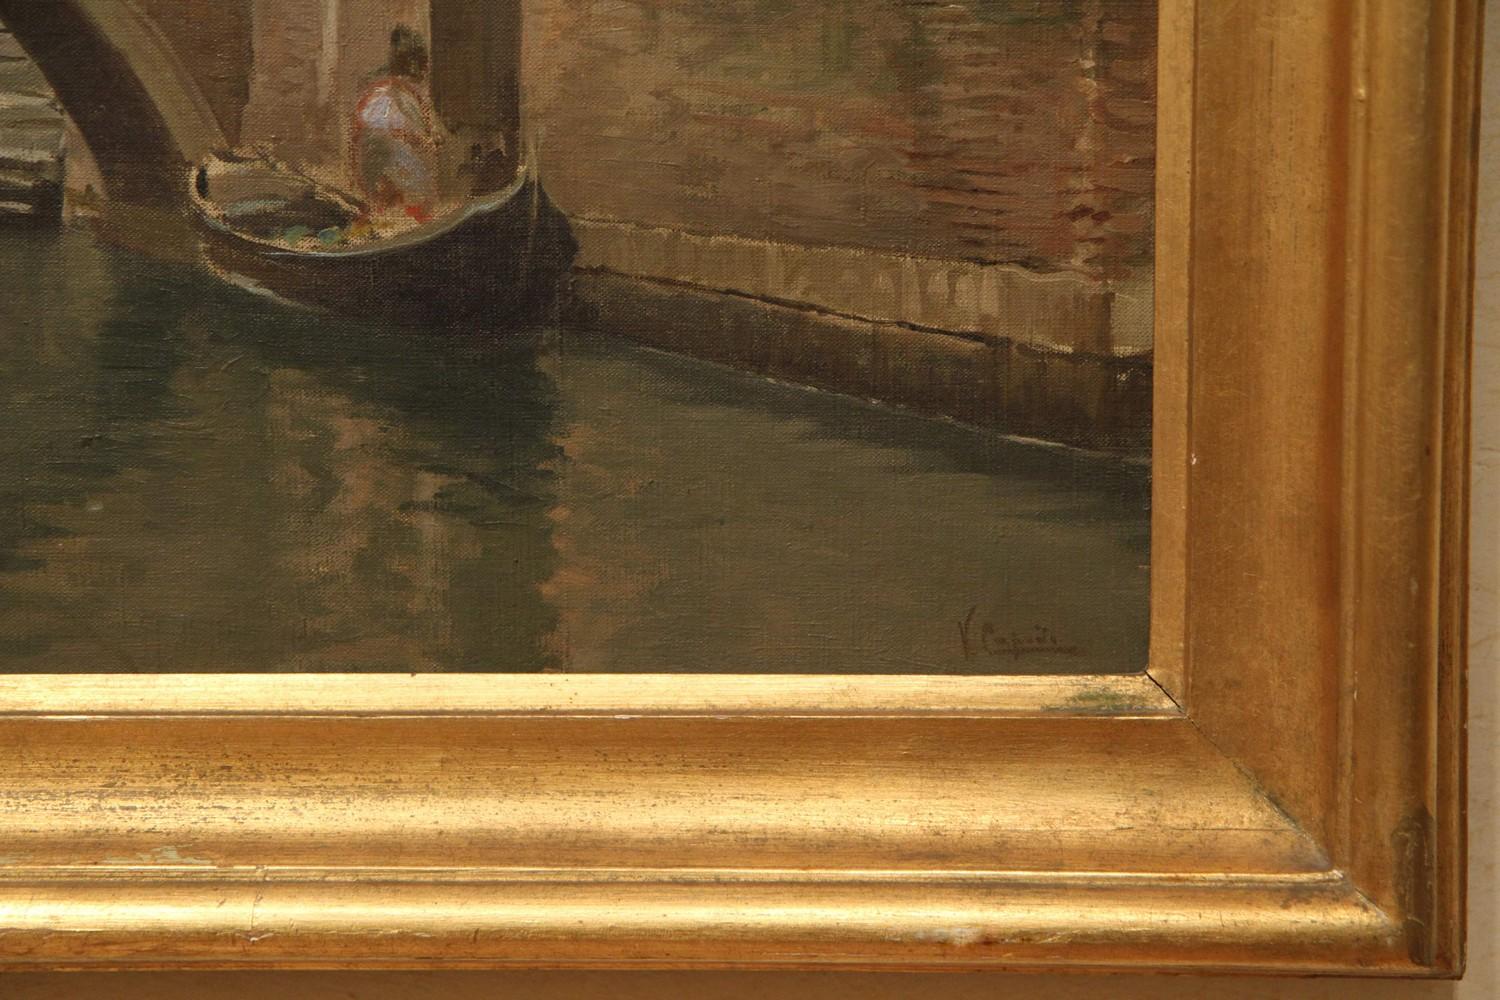 The present oil on canvas is a beautiful and charming example of Venetian view painting, the artist made it on the spot. Every day life is the topic of this composition: the typical Venetian boats called gondolas are moored near the entrances of the